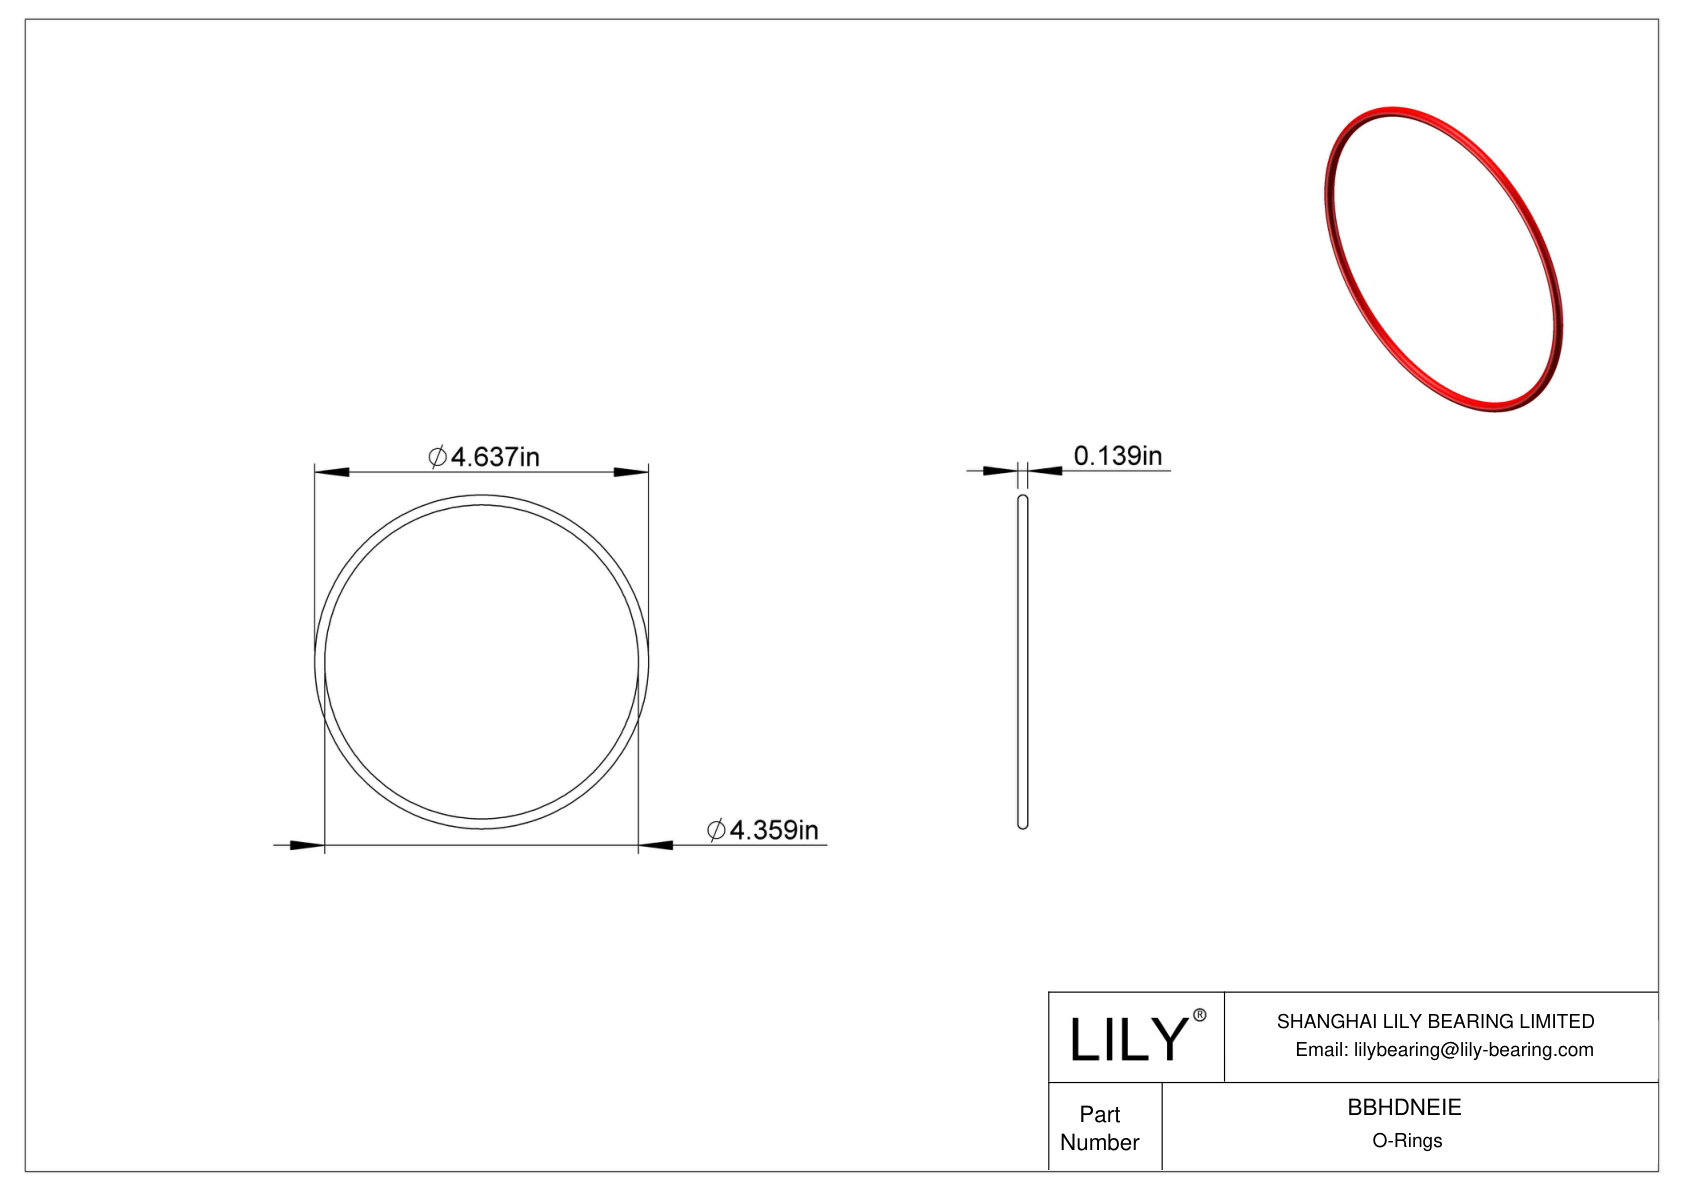 BBHDNEIE High Temperature O-Rings Round cad drawing